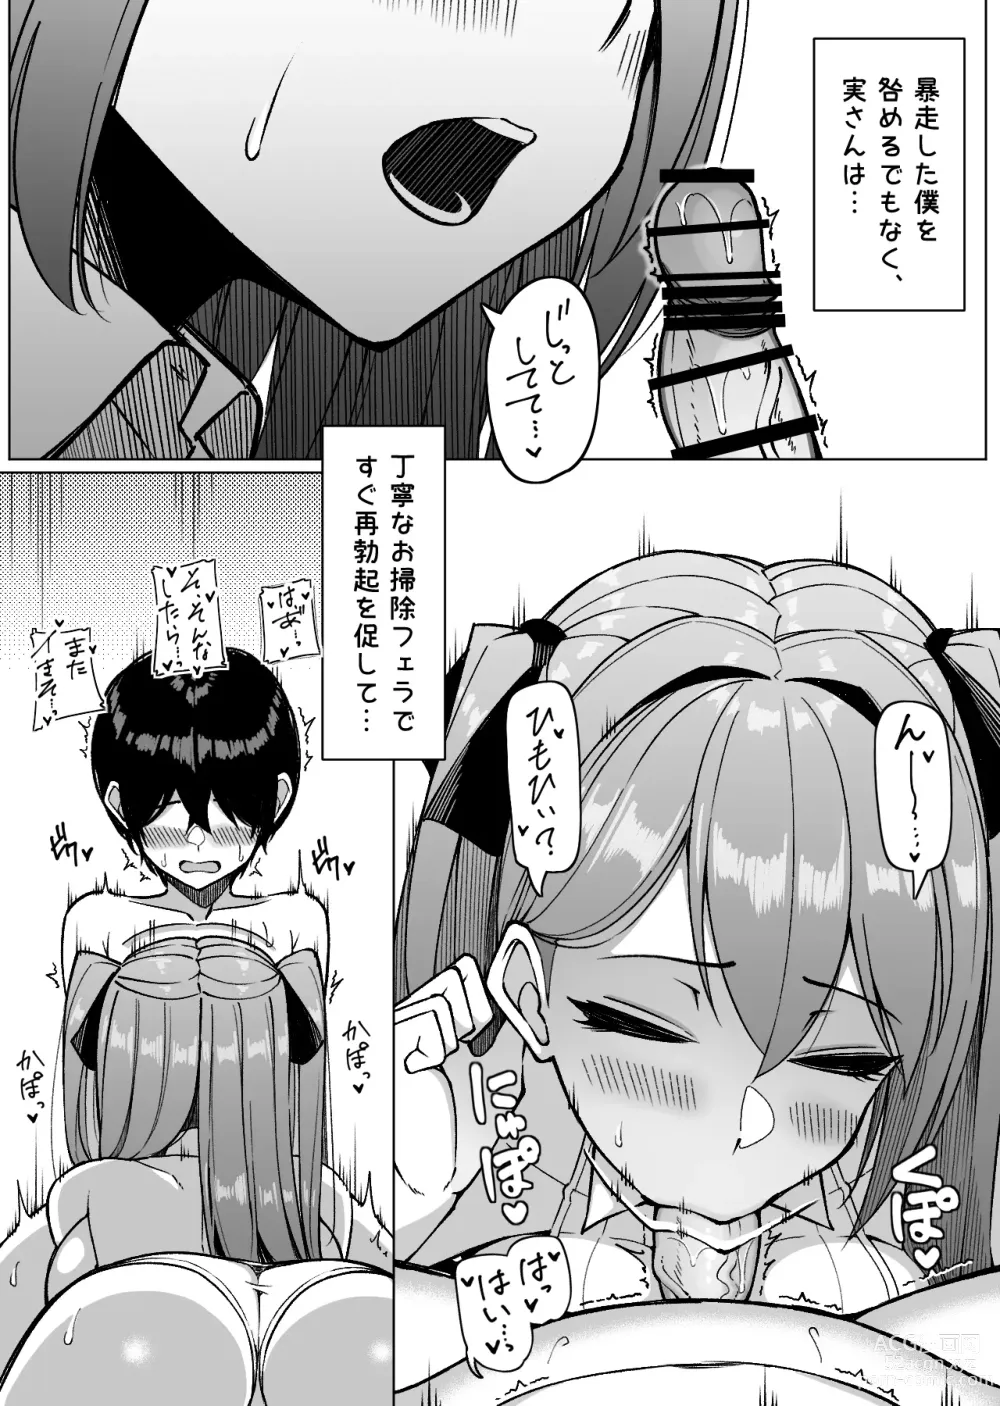 Page 25 of doujinshi Daily Sleepover With Big-breasted Girls